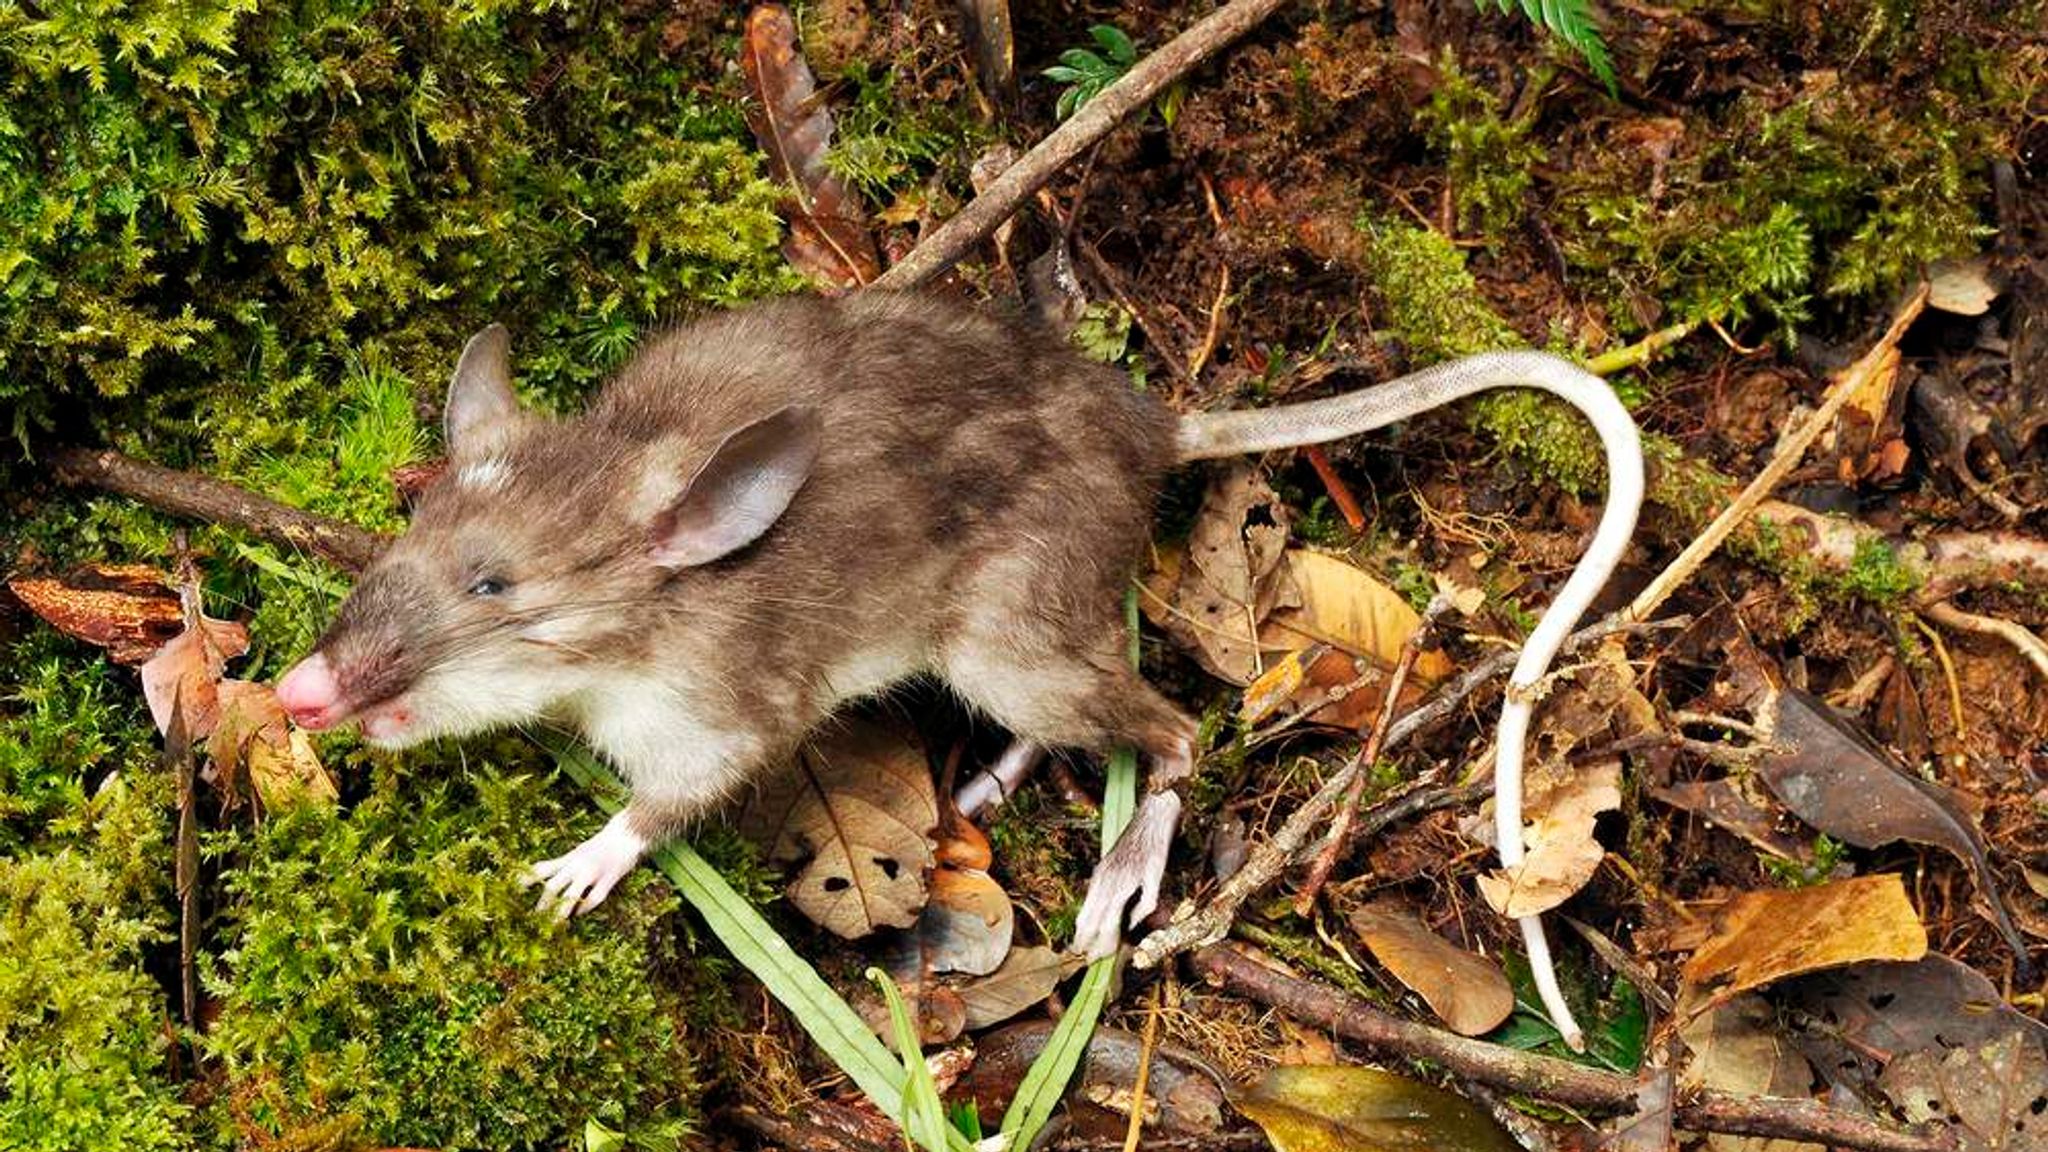 Hog-Nosed Shrew Rat Is 'Exciting' New Species | World News | Sky News